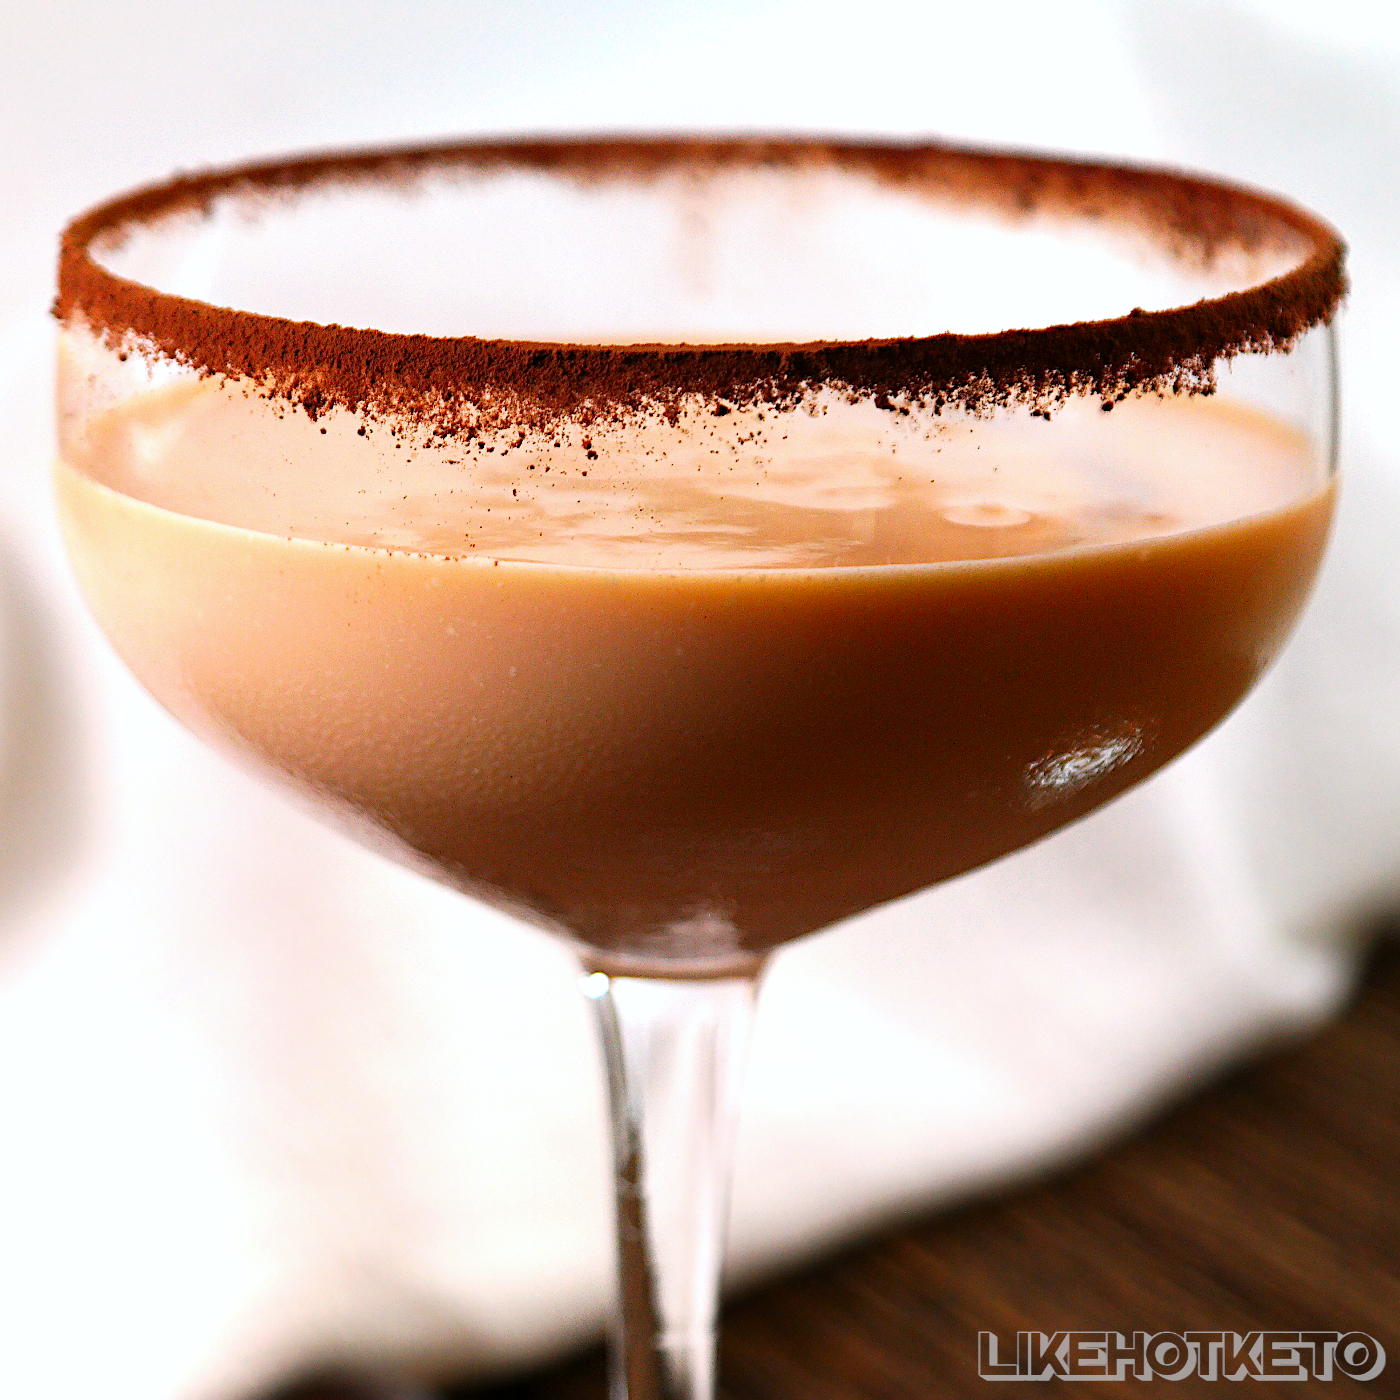 Keto classic Brandy Alexander cocktail in a glass rimmed with cocoa powder.